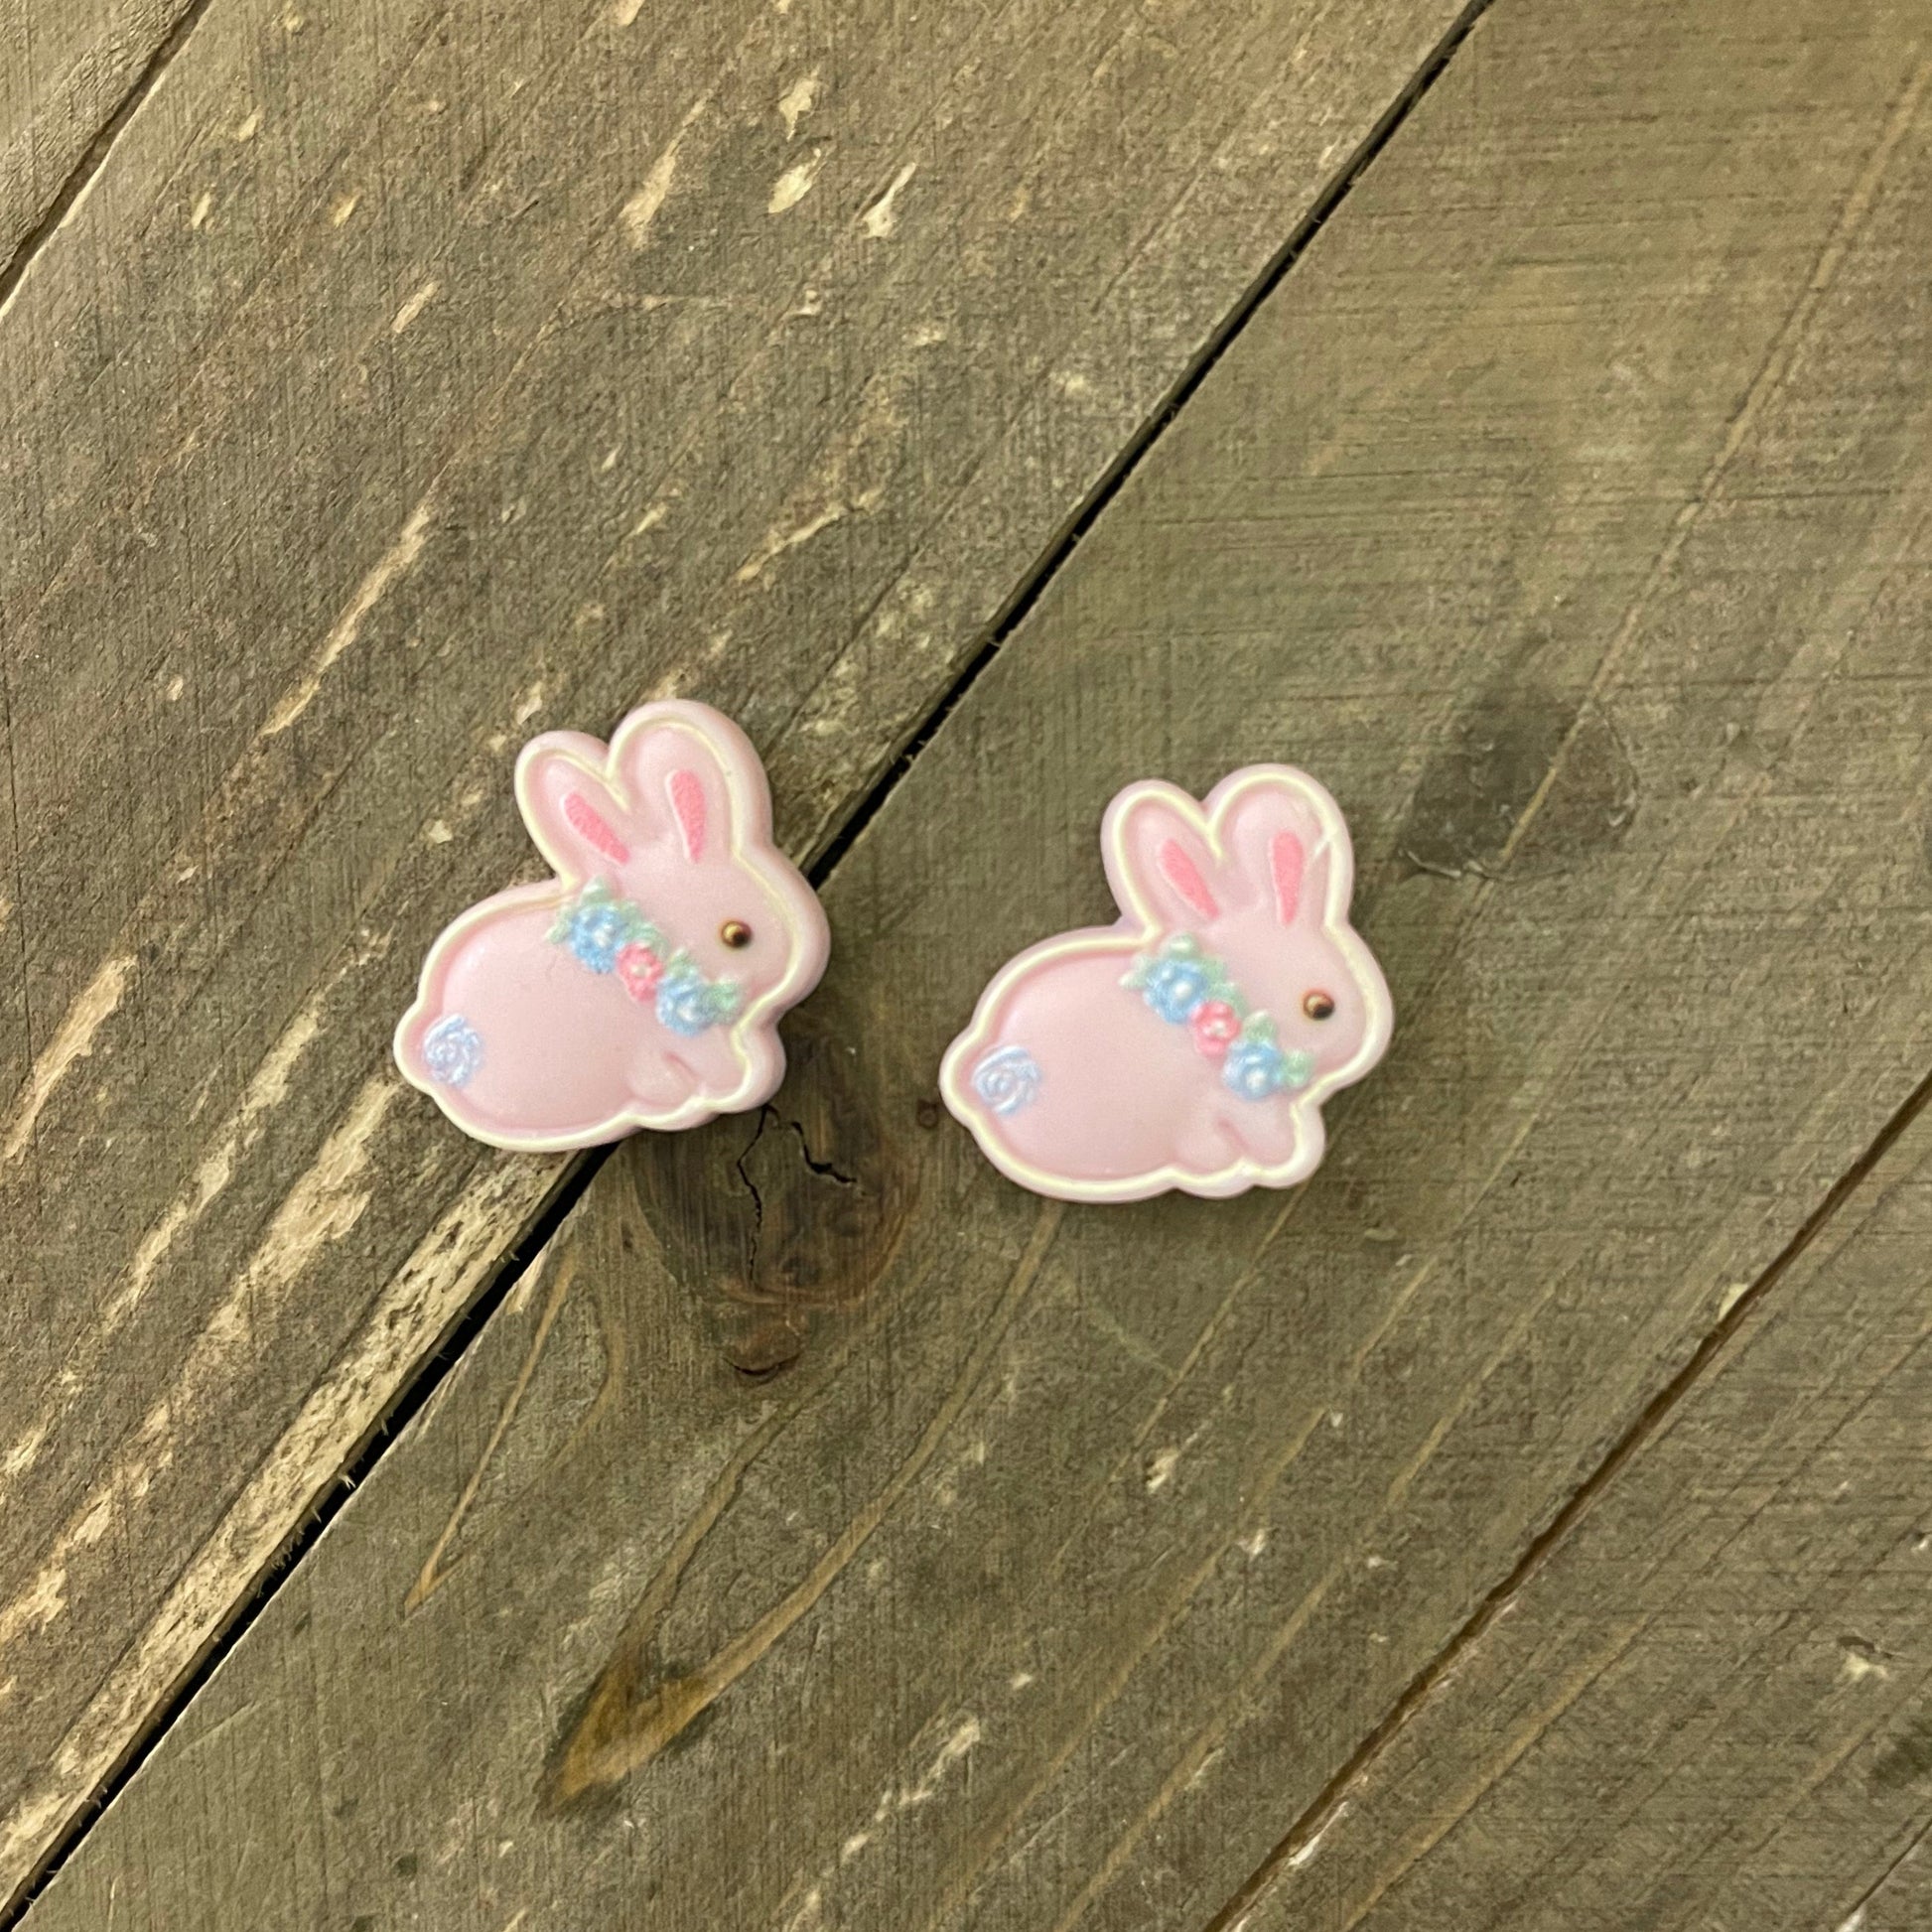 Cottontail Bunny Stud Earrings (5 different ones)Pink tiful of LOVE